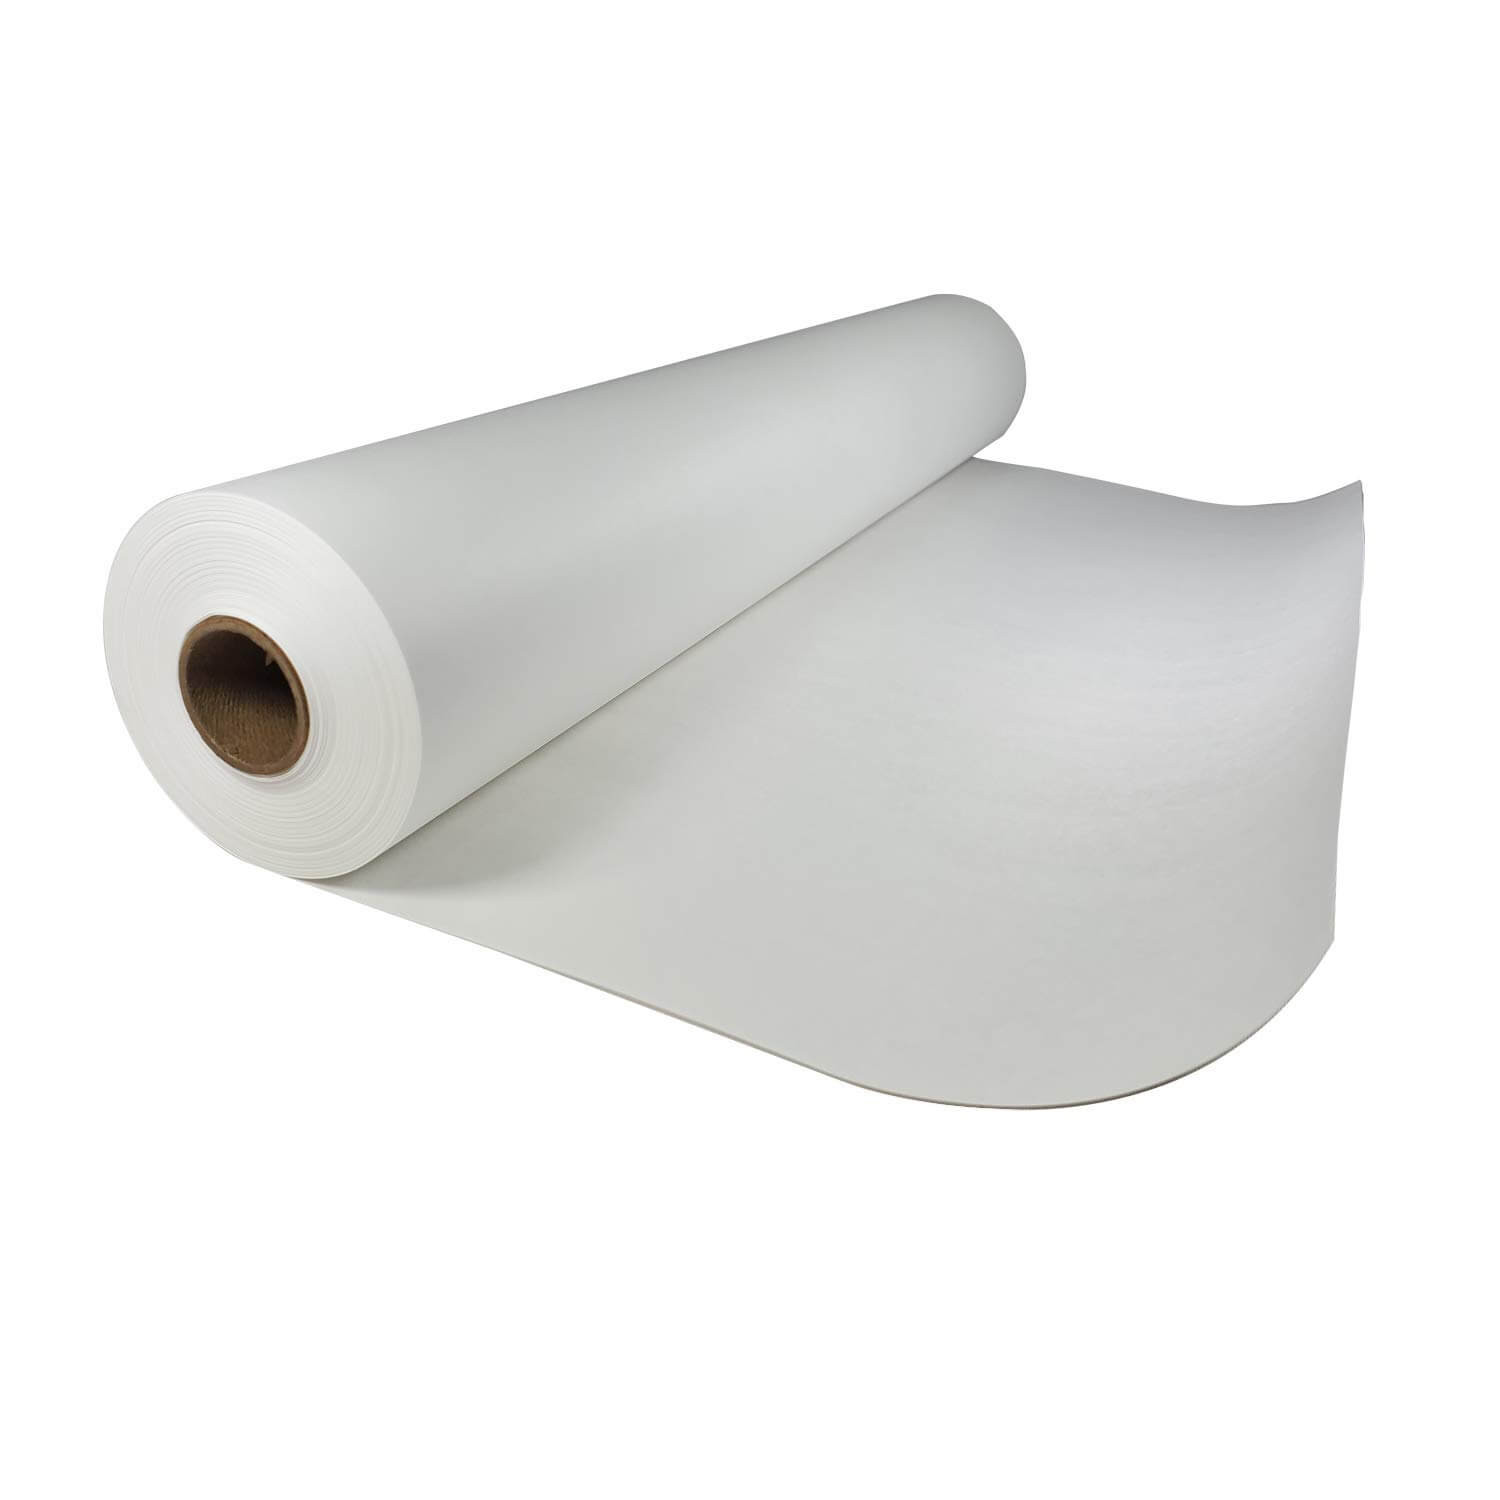 18 x 1000' White Butcher Paper Roll for Wrapping Meat and Fish buy in  stock in U.S. in IDL Packaging